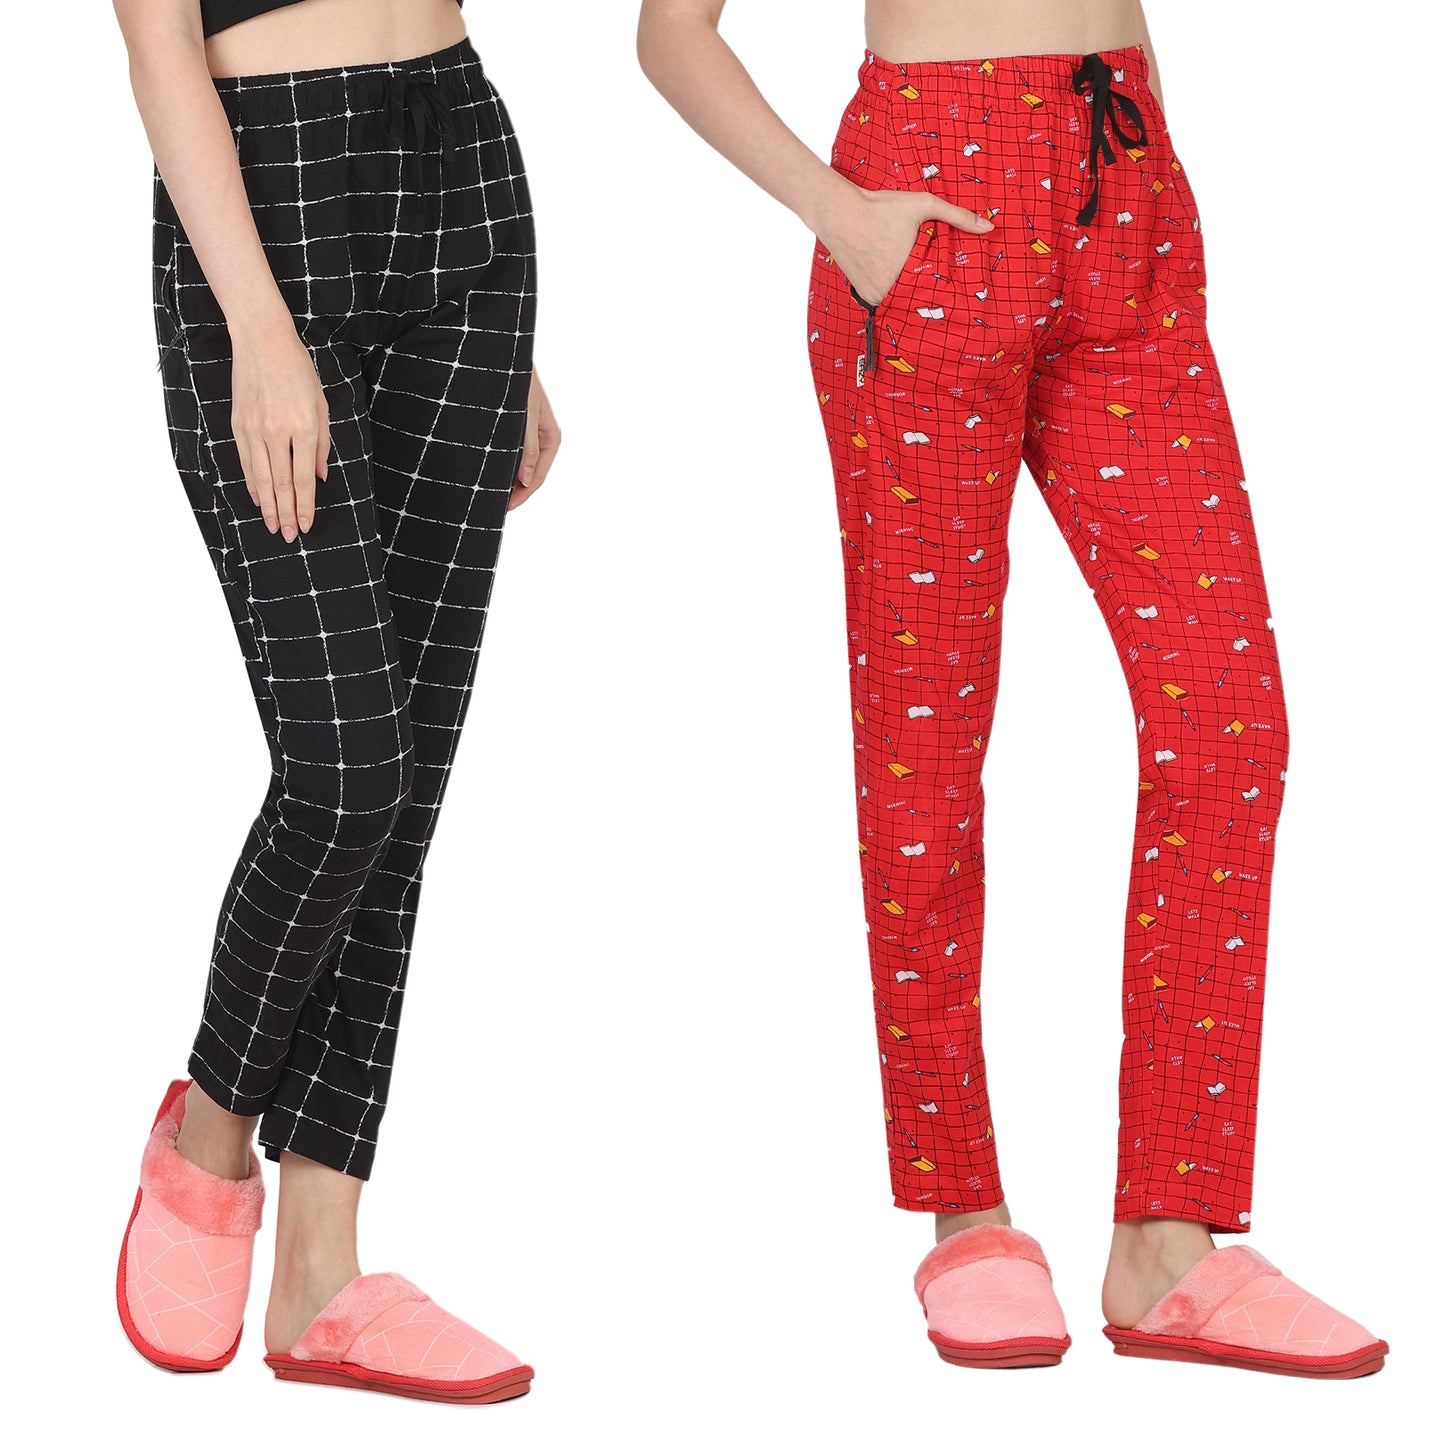 Eazy Women's Printed Lower - Pack of 2 - Black & Bright Red